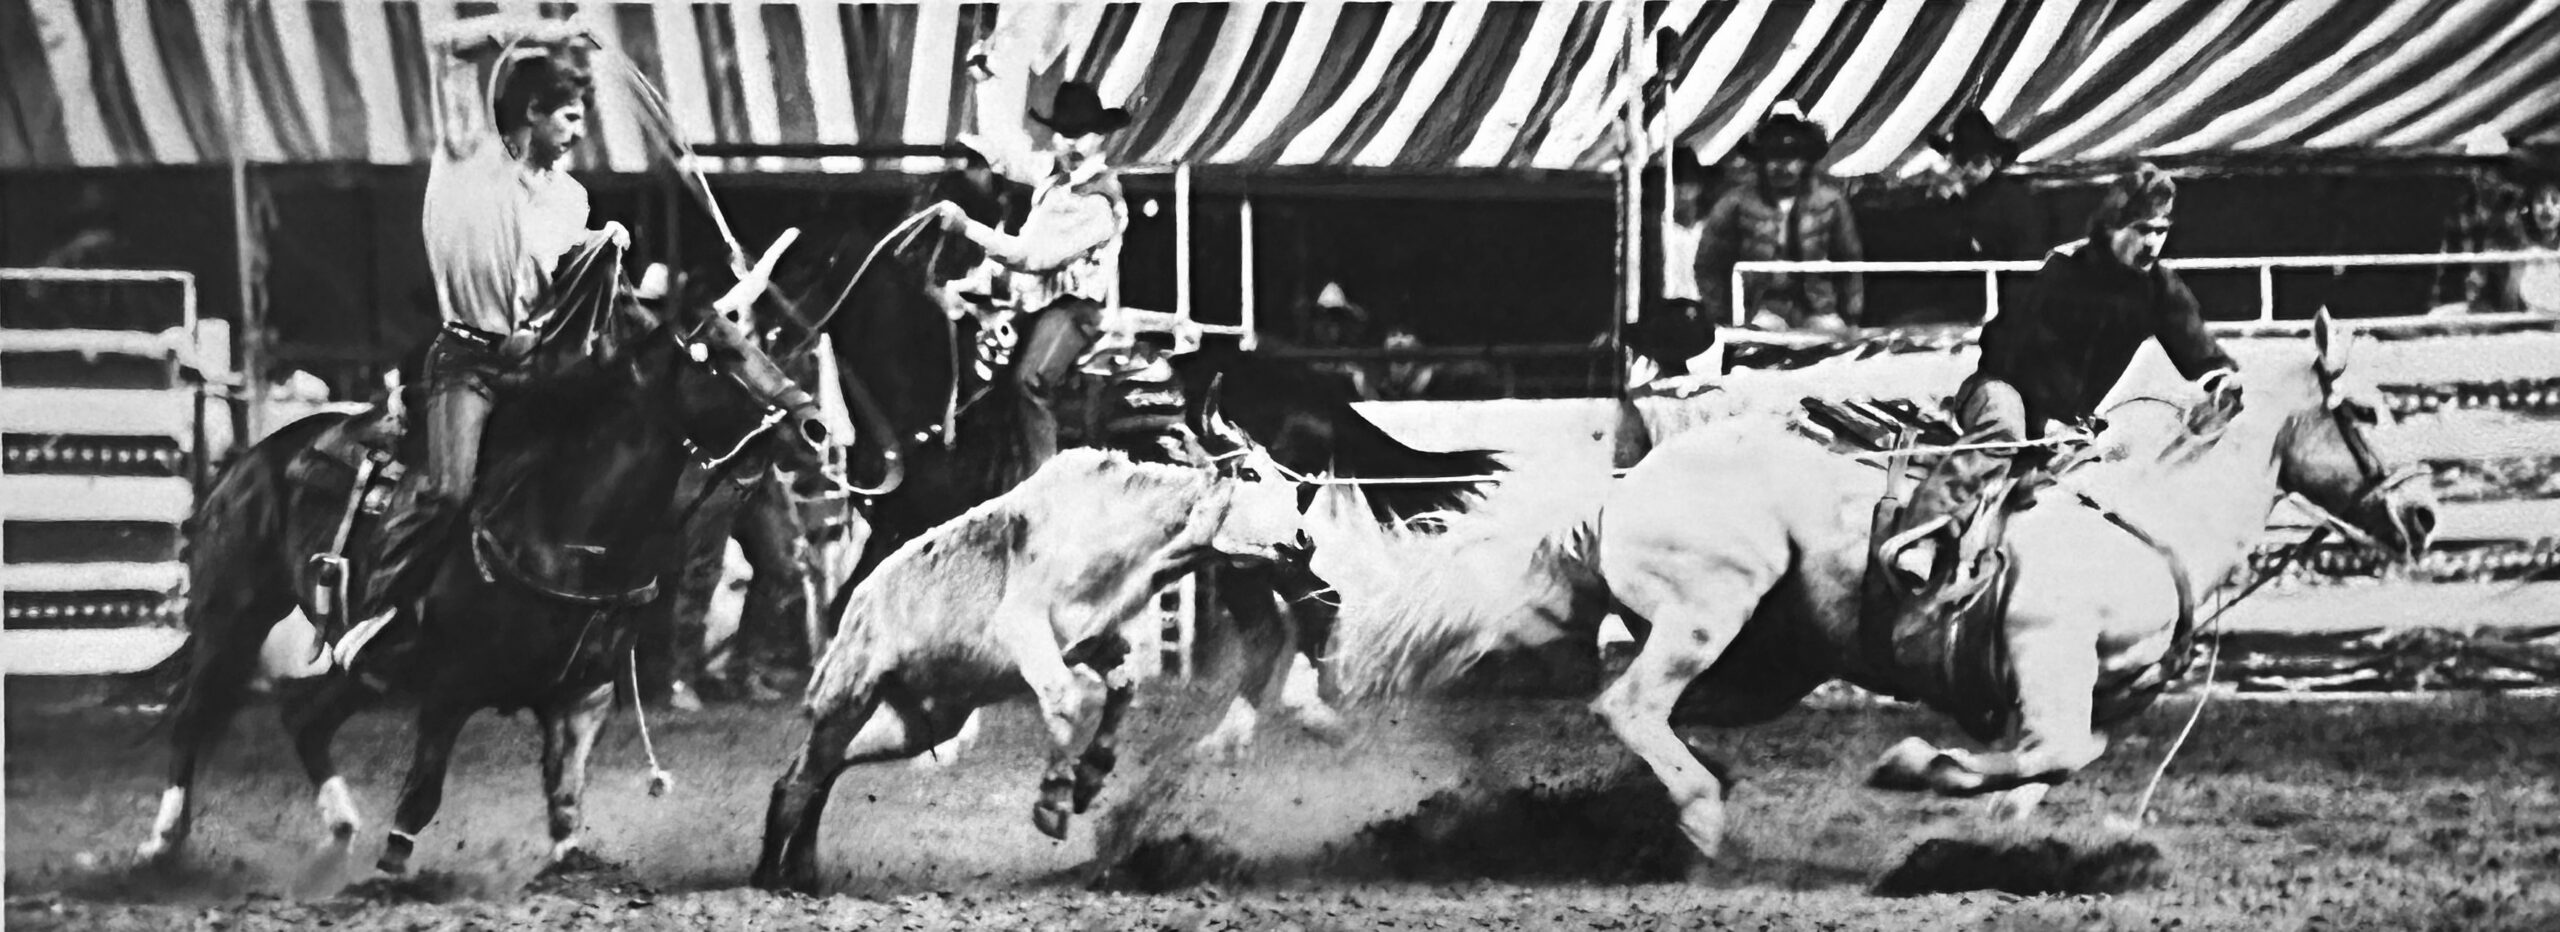 historic 1987 photo of Mark Fanning roping in 1987
